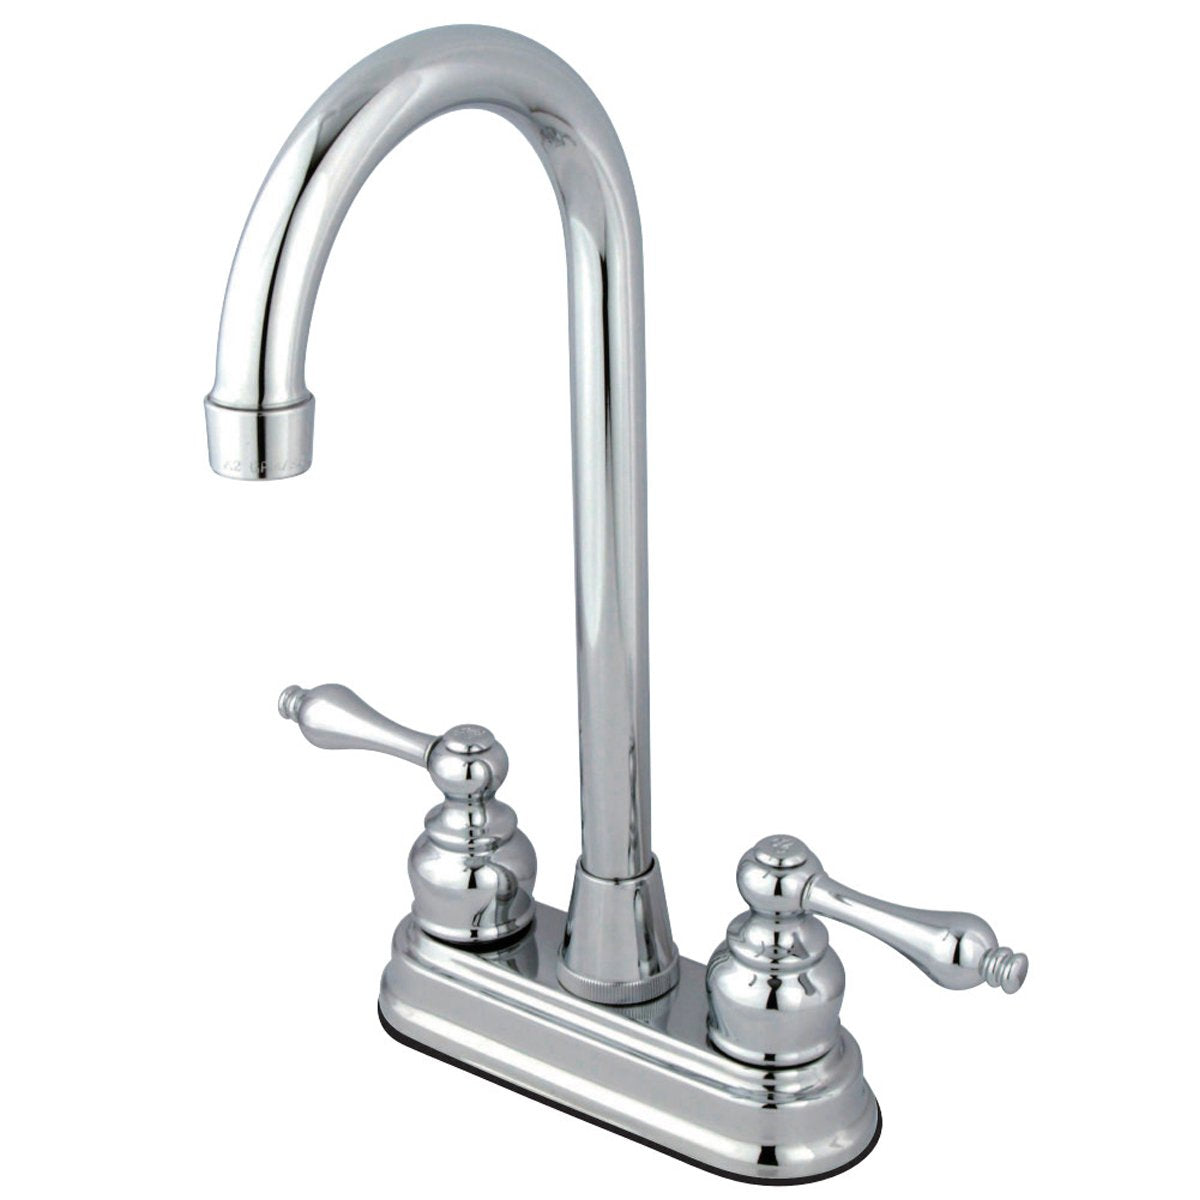 Bar and Prep Sink Faucets from Kingston Brass